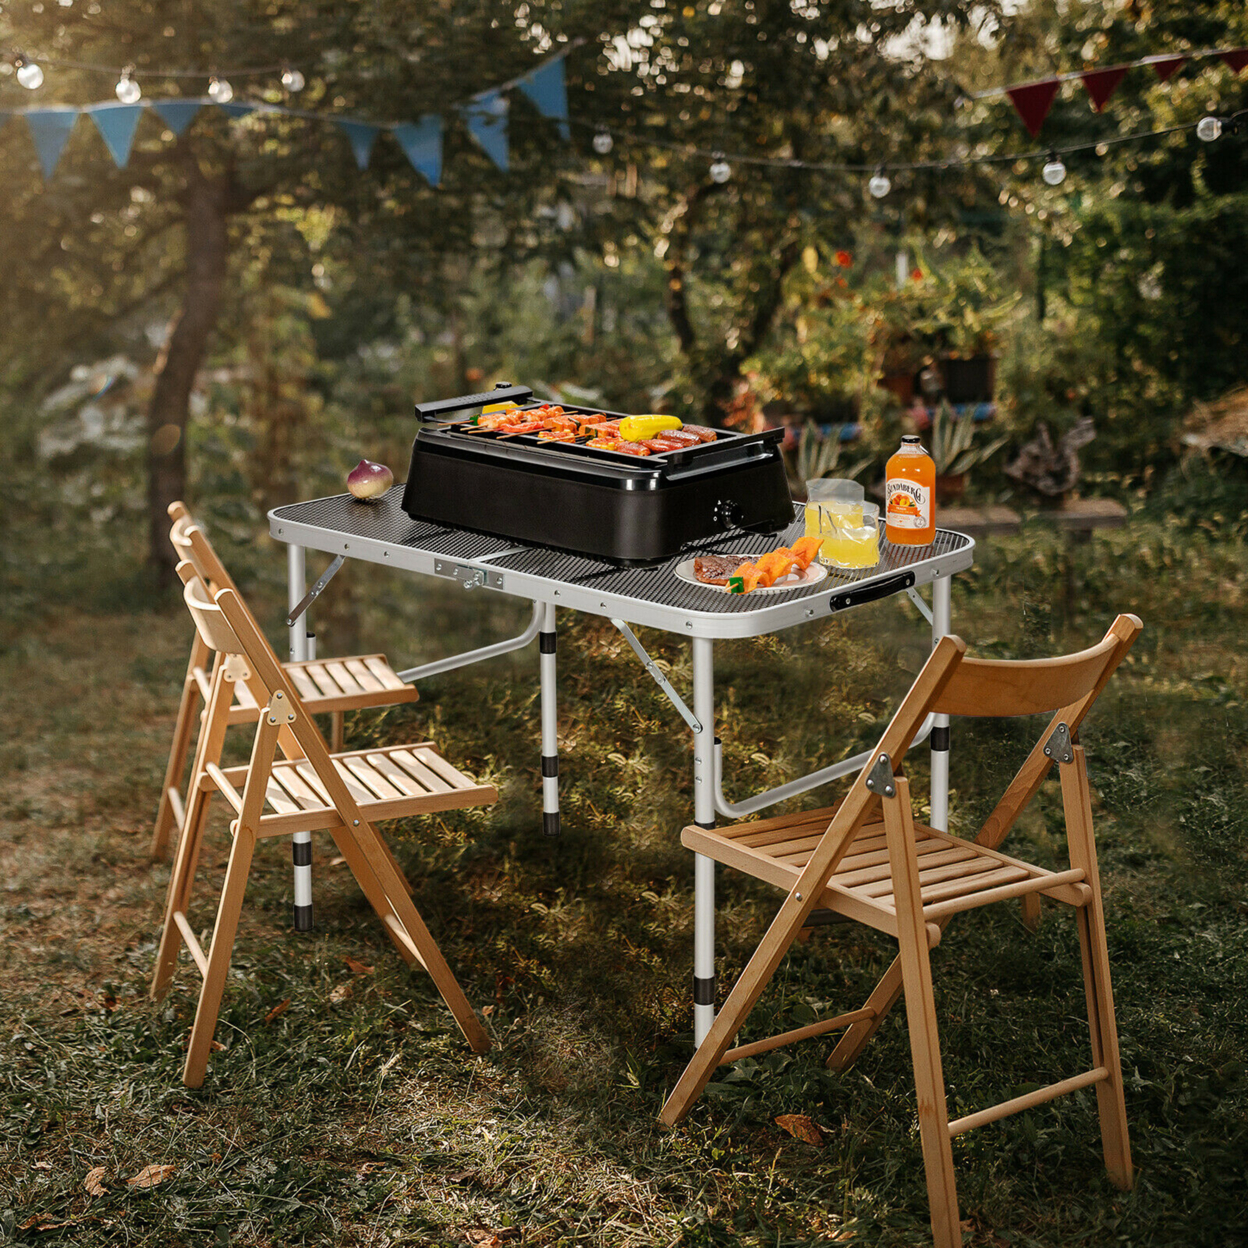 Folding Grill Table For Camping Lightweight Aluminum Metal Grill Stand Table